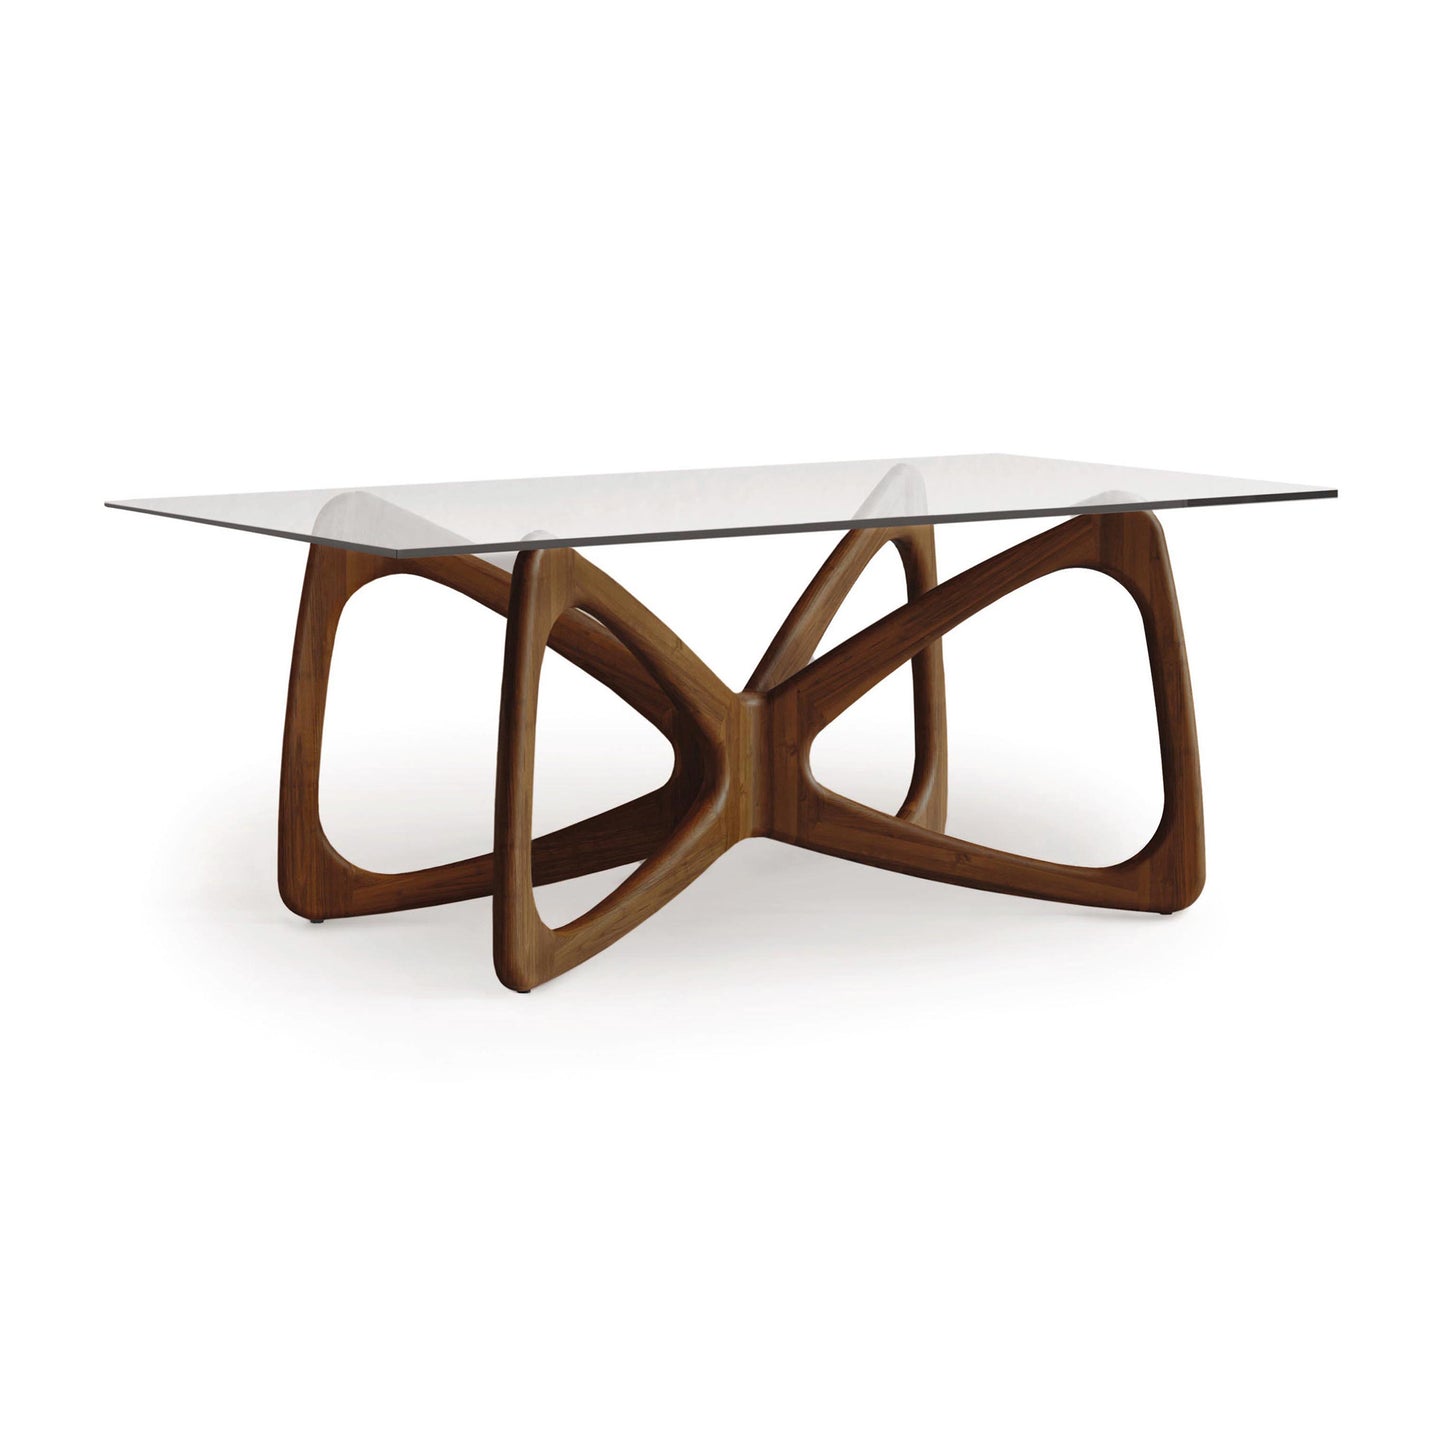 Copeland Furniture Butterfly Glass Top Dining Table with Modern Sculptural Wooden Base in North American Hardwood Finish - Solid Wood, High-Quality, American Made.